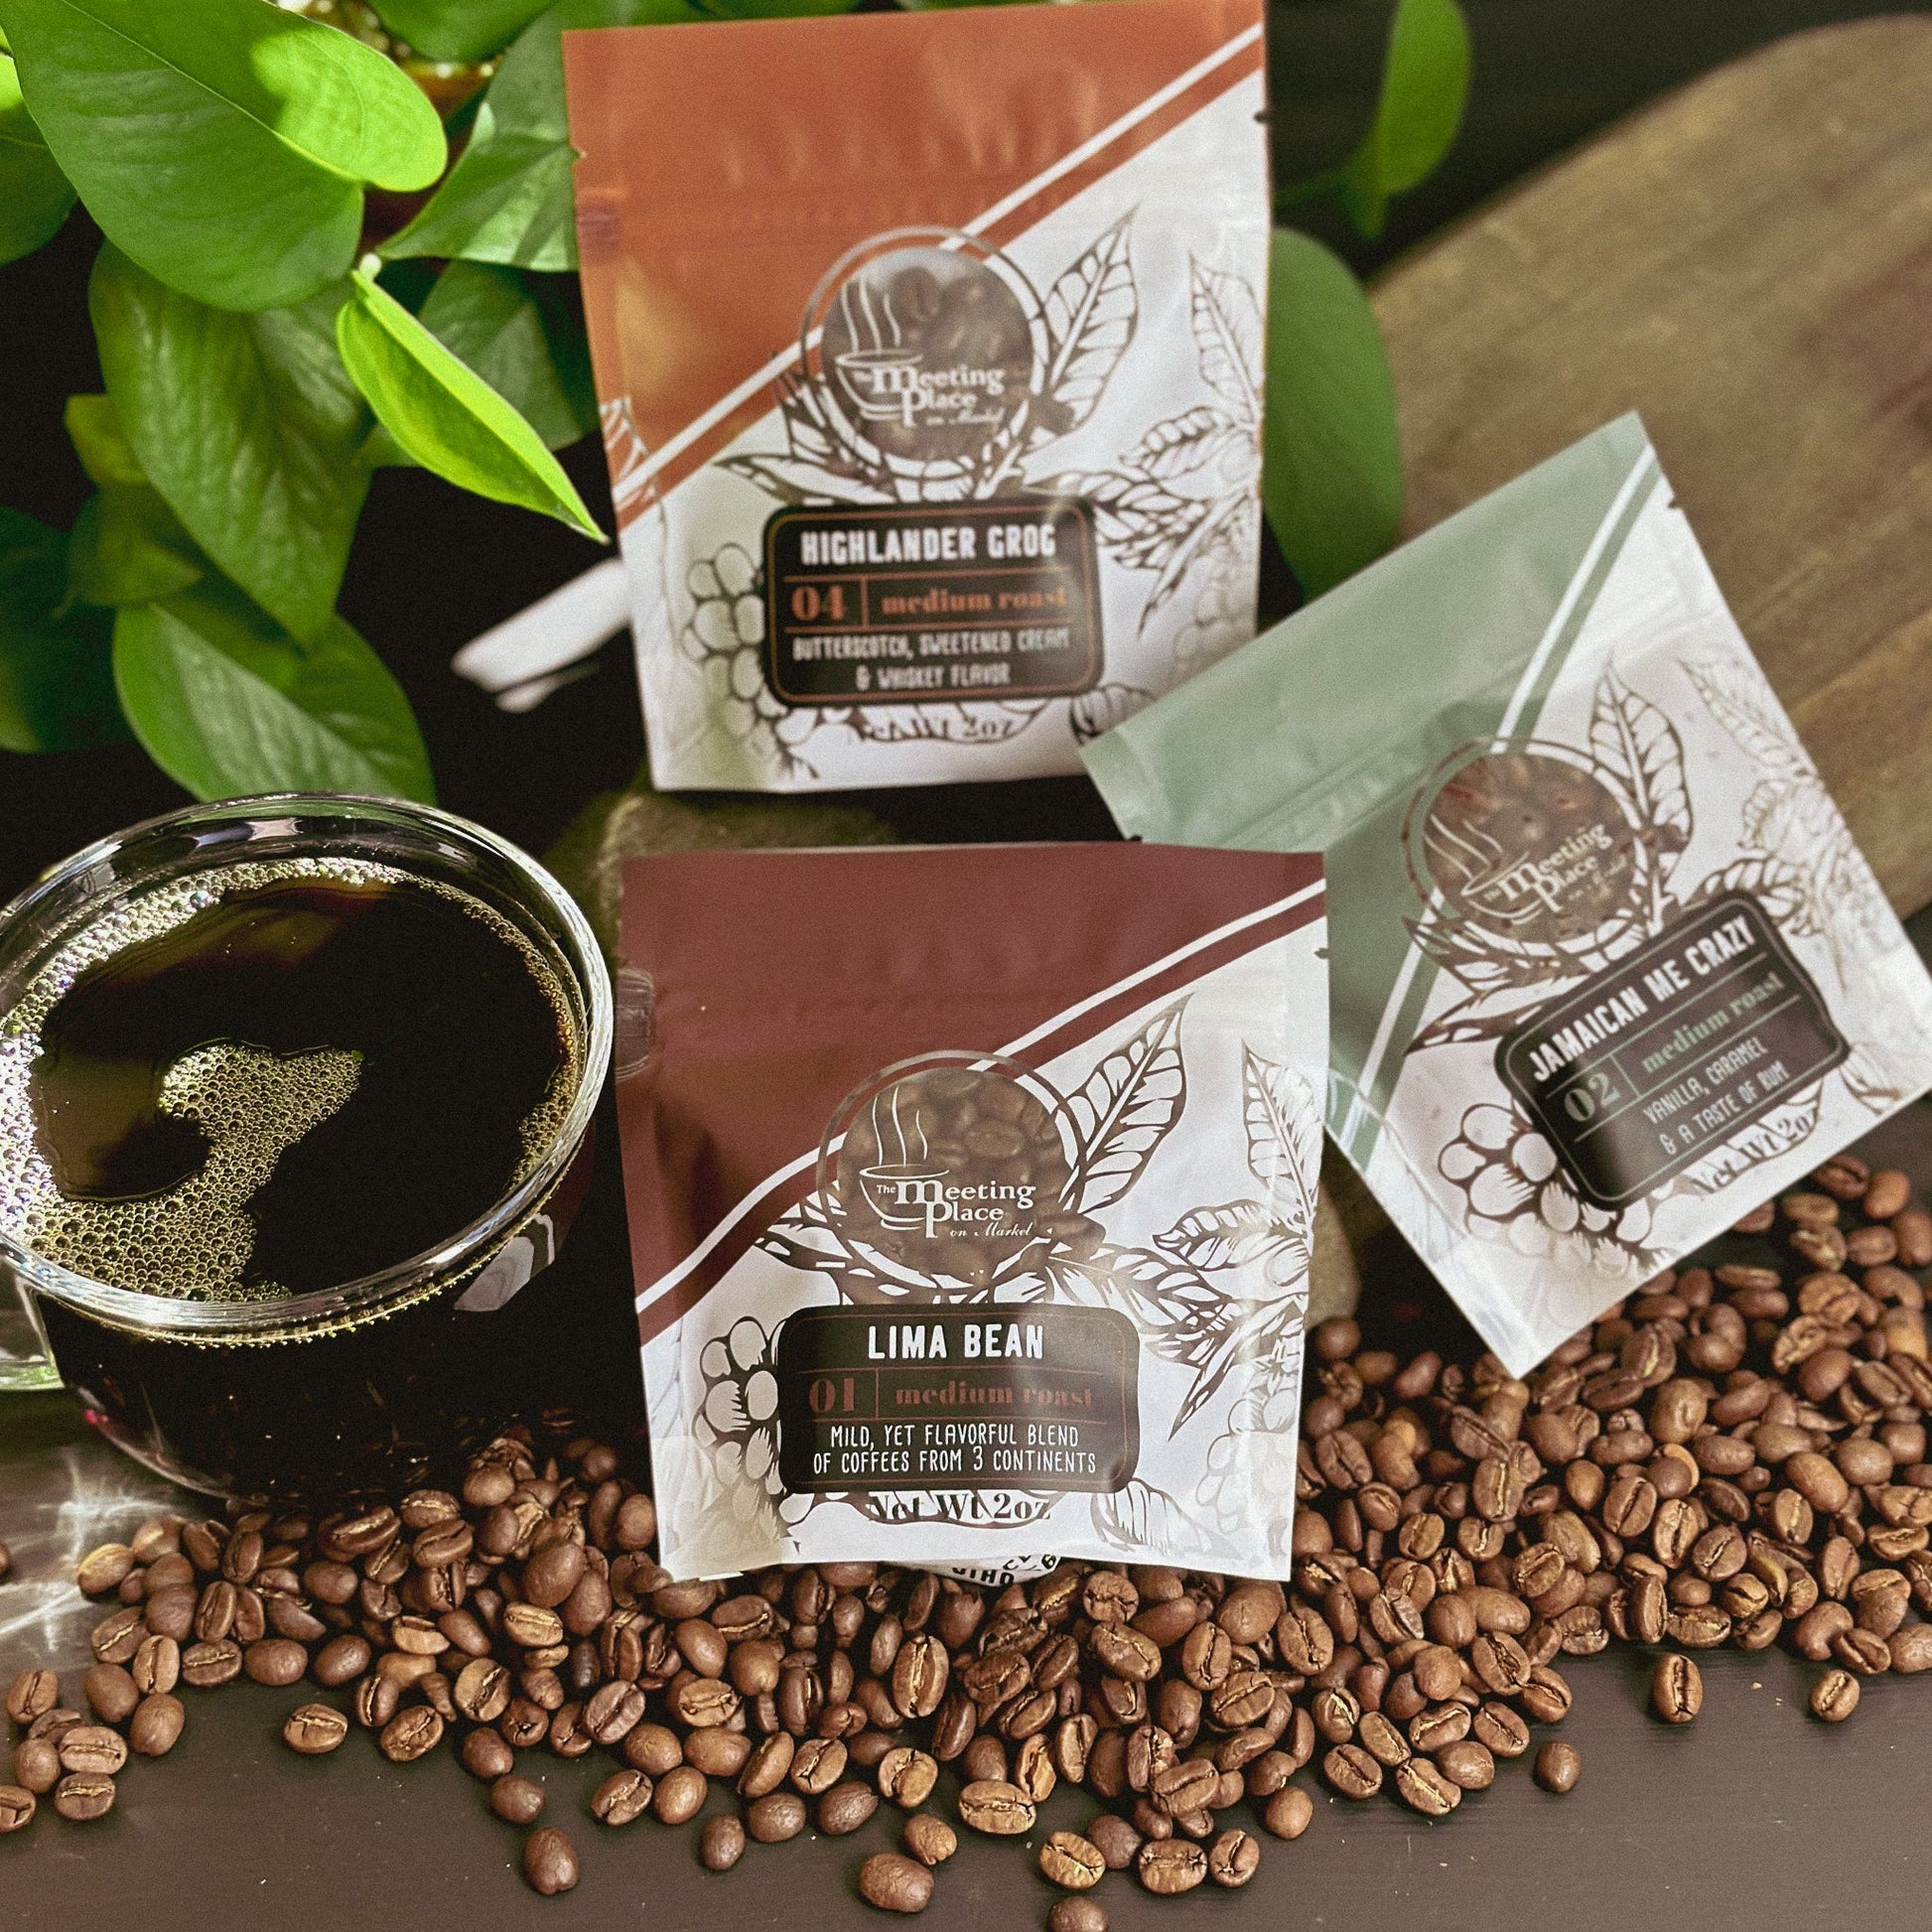 Surprise Coffee Sampler - Variety of 3 Samplers Coffee Sampler - The Meeting Place on Market